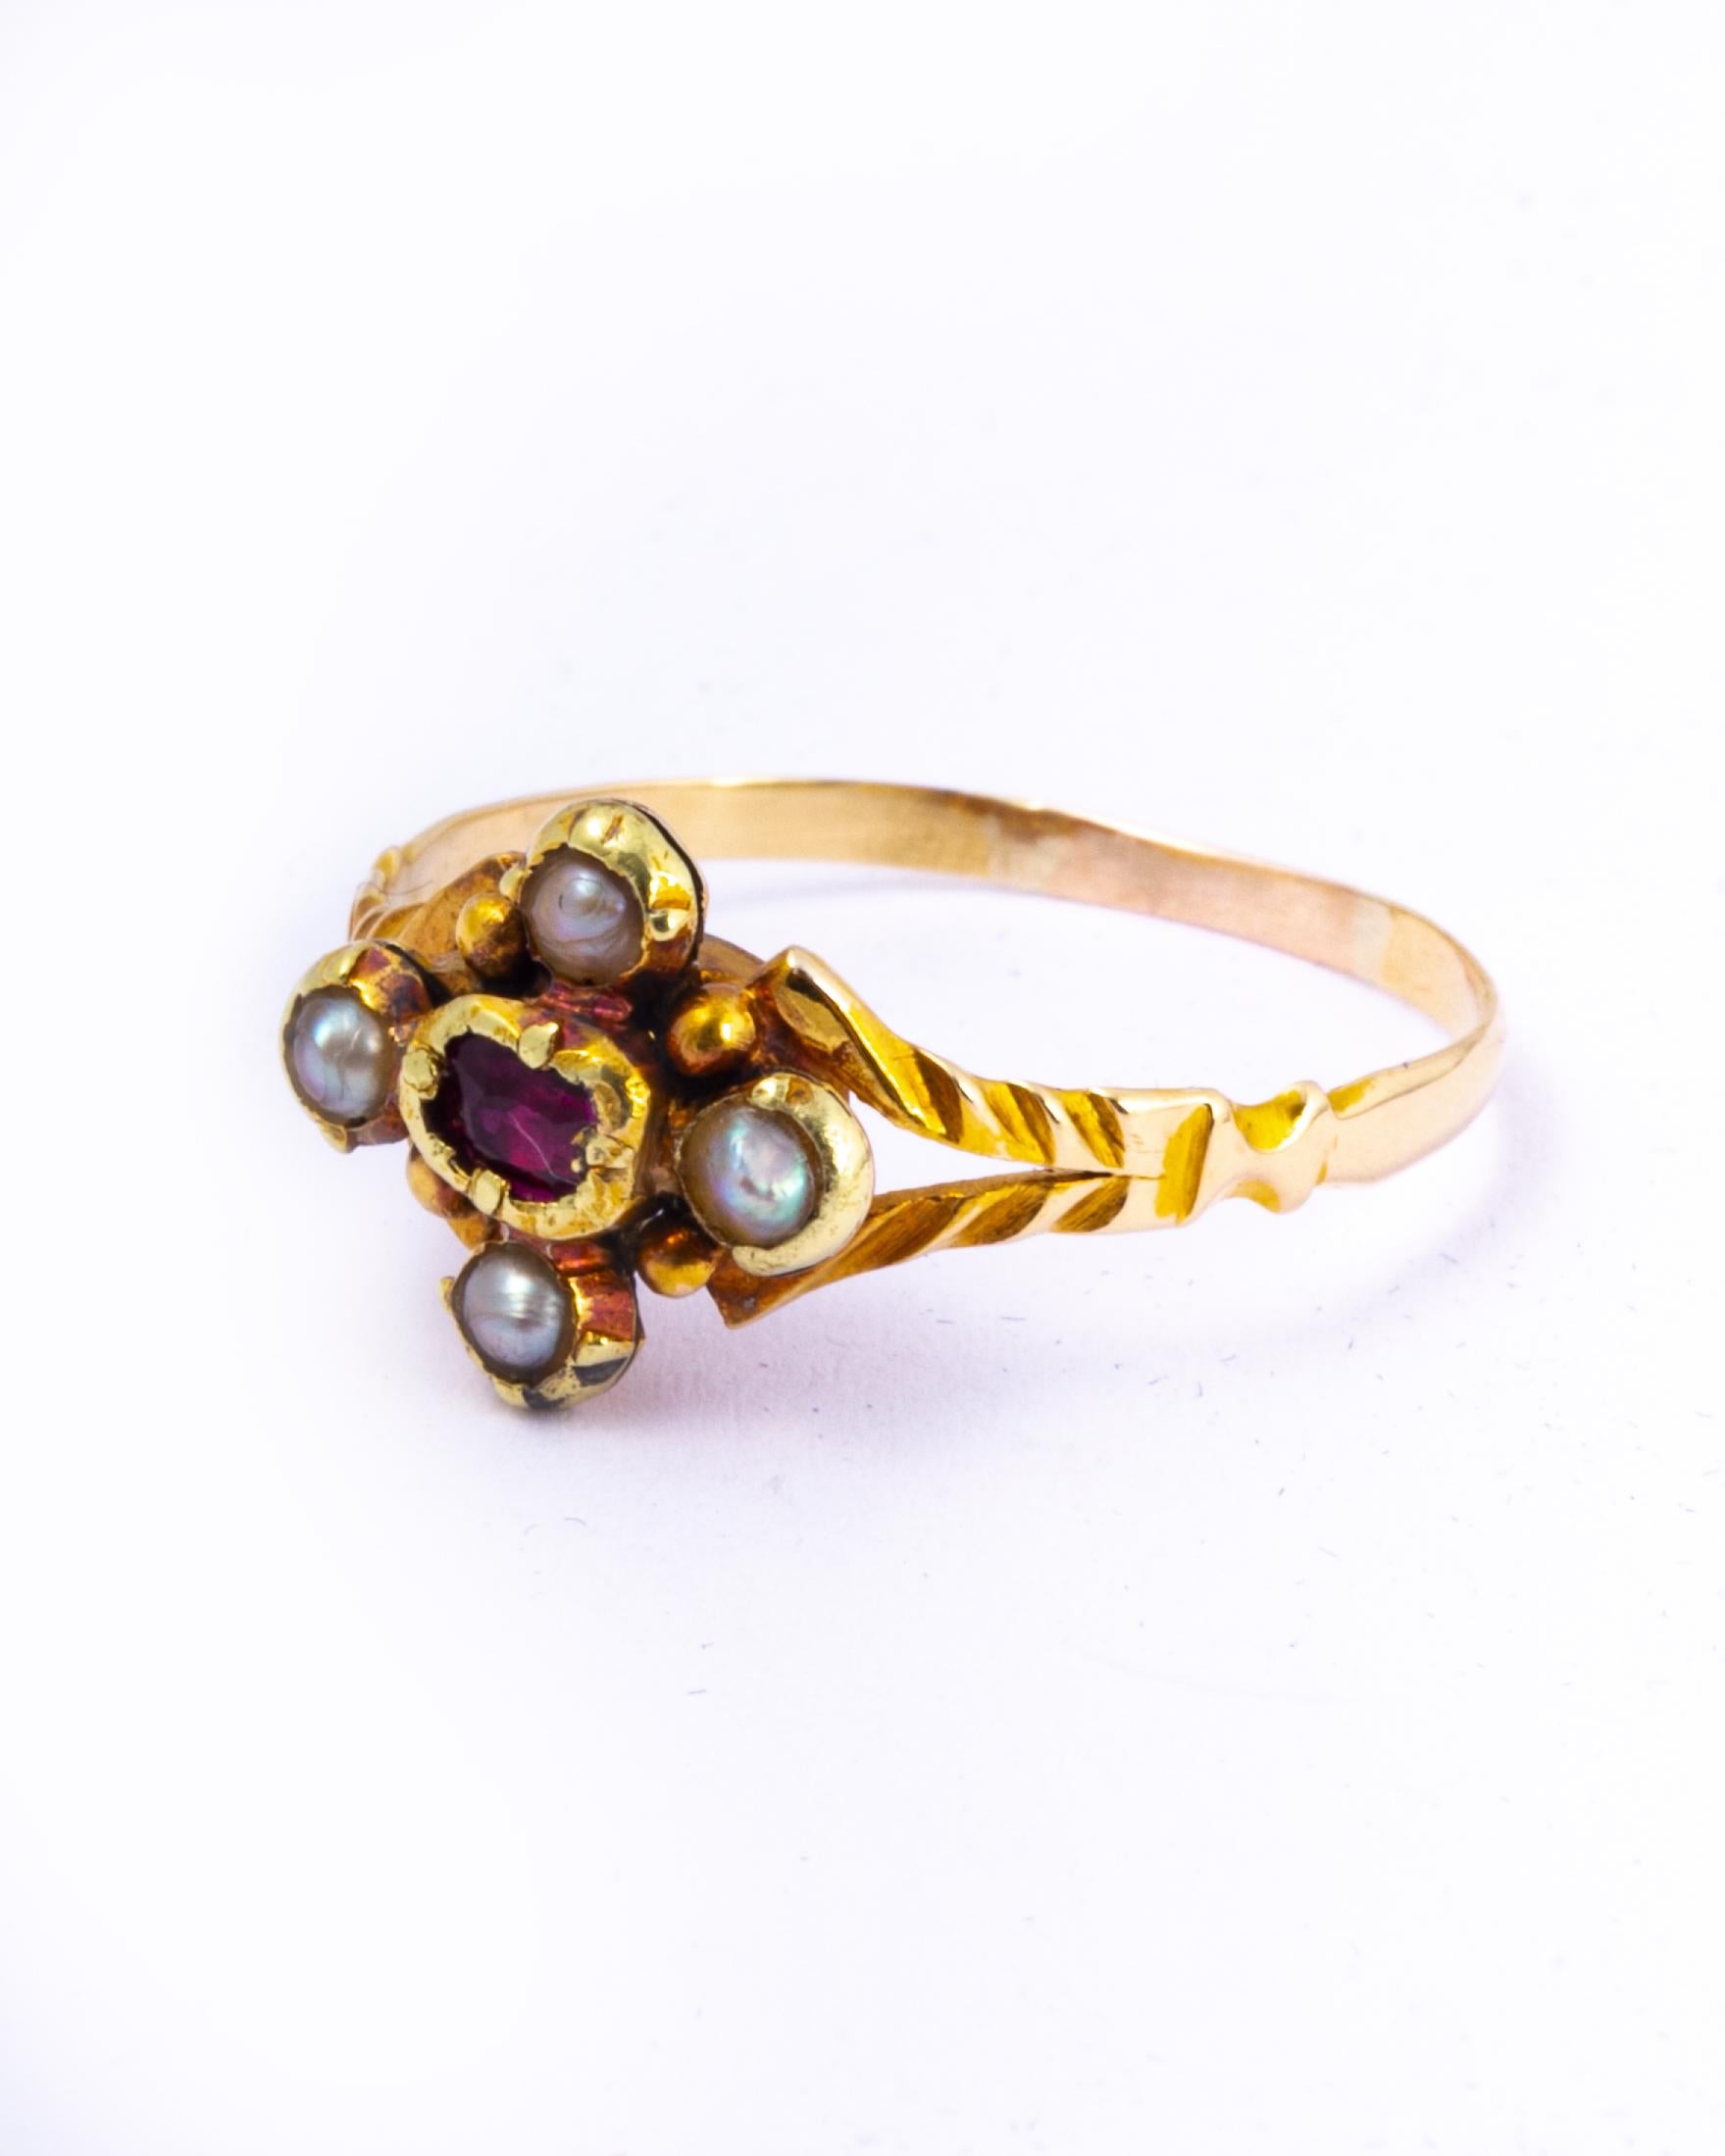 A spectacular antique Georgian ring. Centred with a wonderful ruby bordered on all sides by beautiful pearls. The split shoulders have wonderful texture and moulded detail. Modelled in 15 carat yellow gold.

Ring Size: N or 6 3/4 
Widest Point: